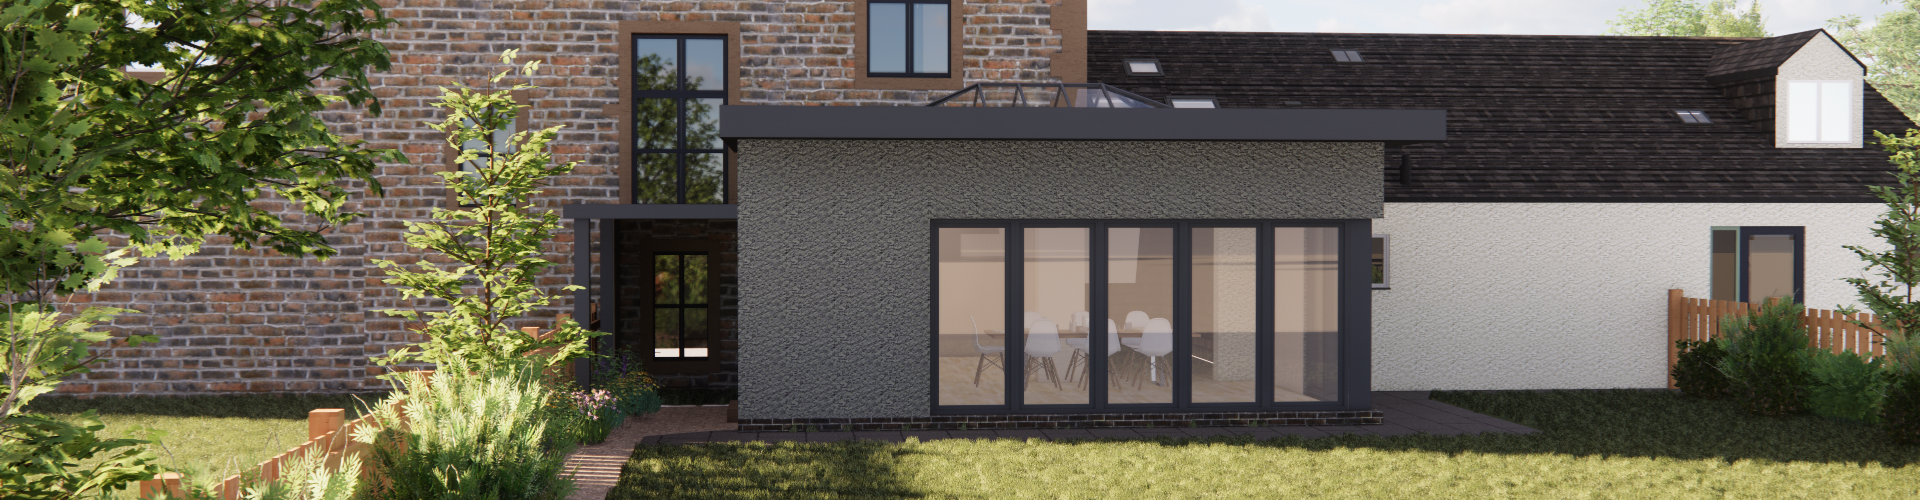 3D model showing exterior of extension